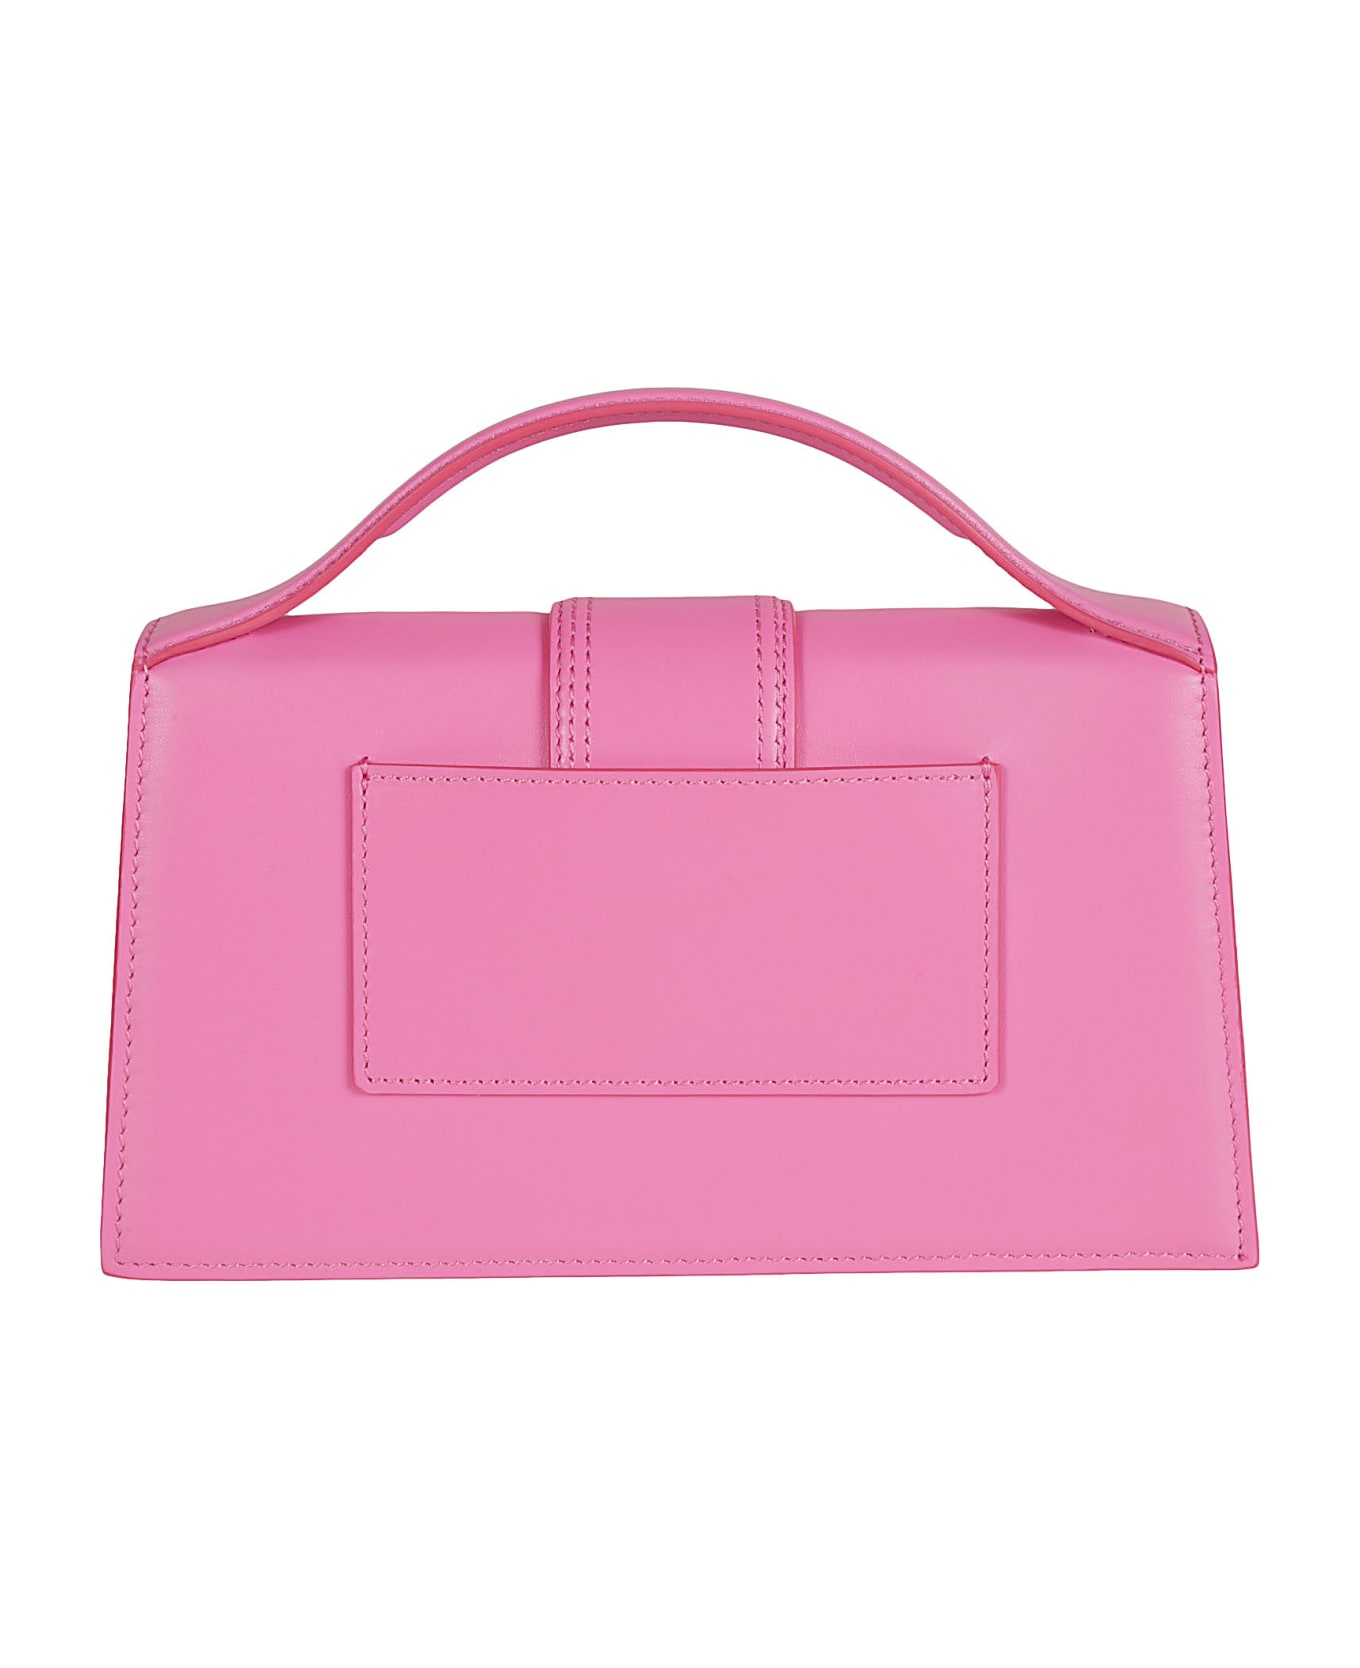 Jacquemus Le Grand Bambino Leather Bag - Neon pink トートバッグ